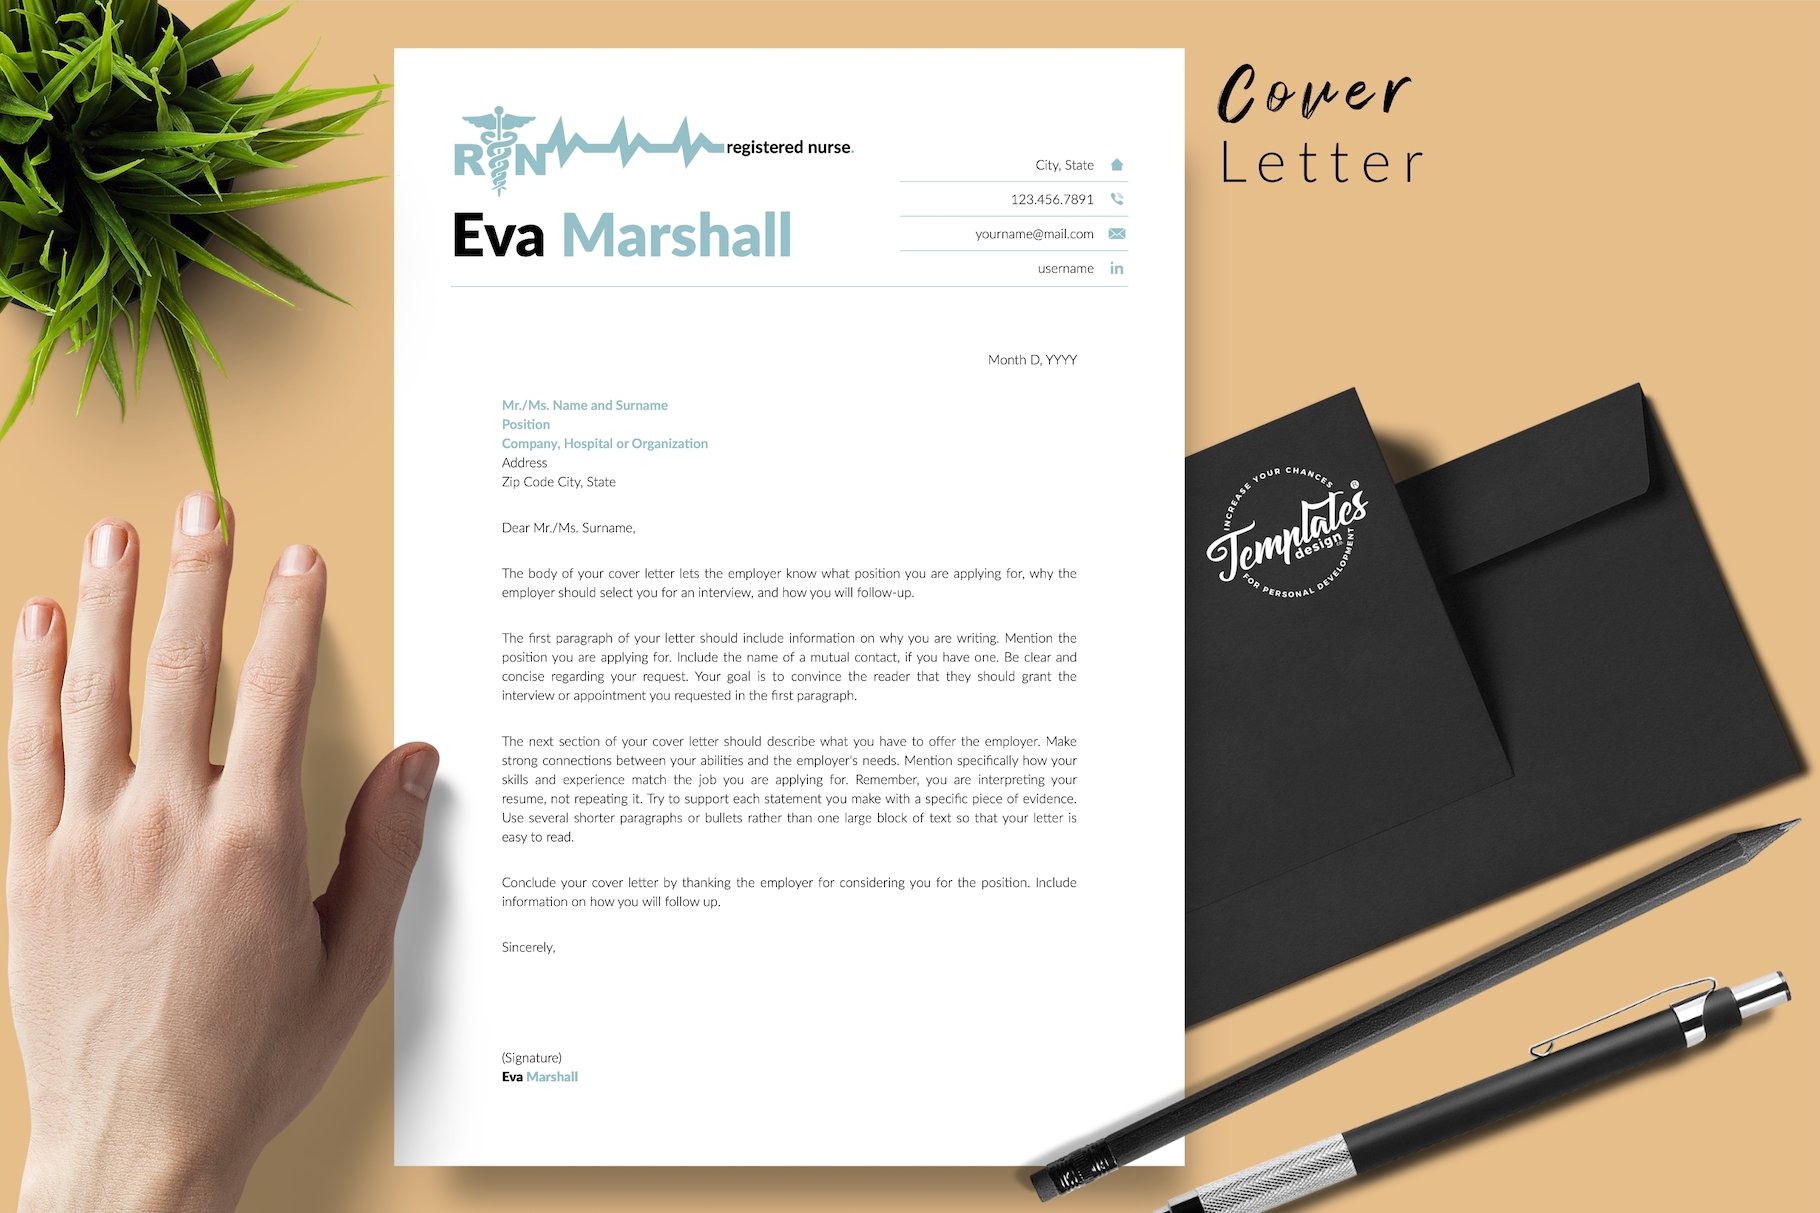 Person holding a pen next to a letterhead.